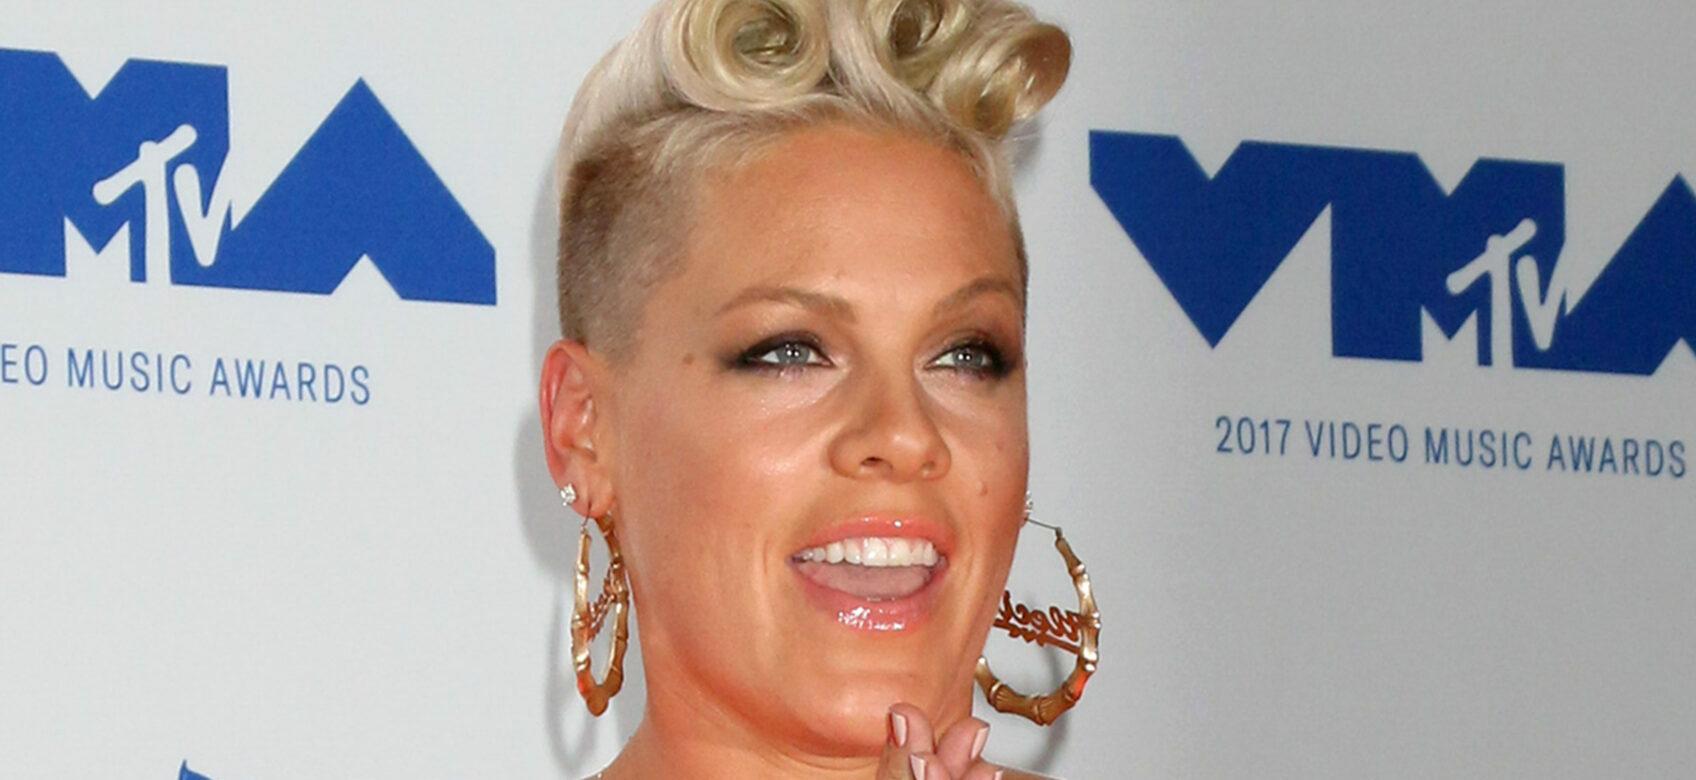 Pink, Alecia Beth Moore at the MTV Video Music Awards 2017 at The Forum on August 27, 2017 in Inglewood, CA